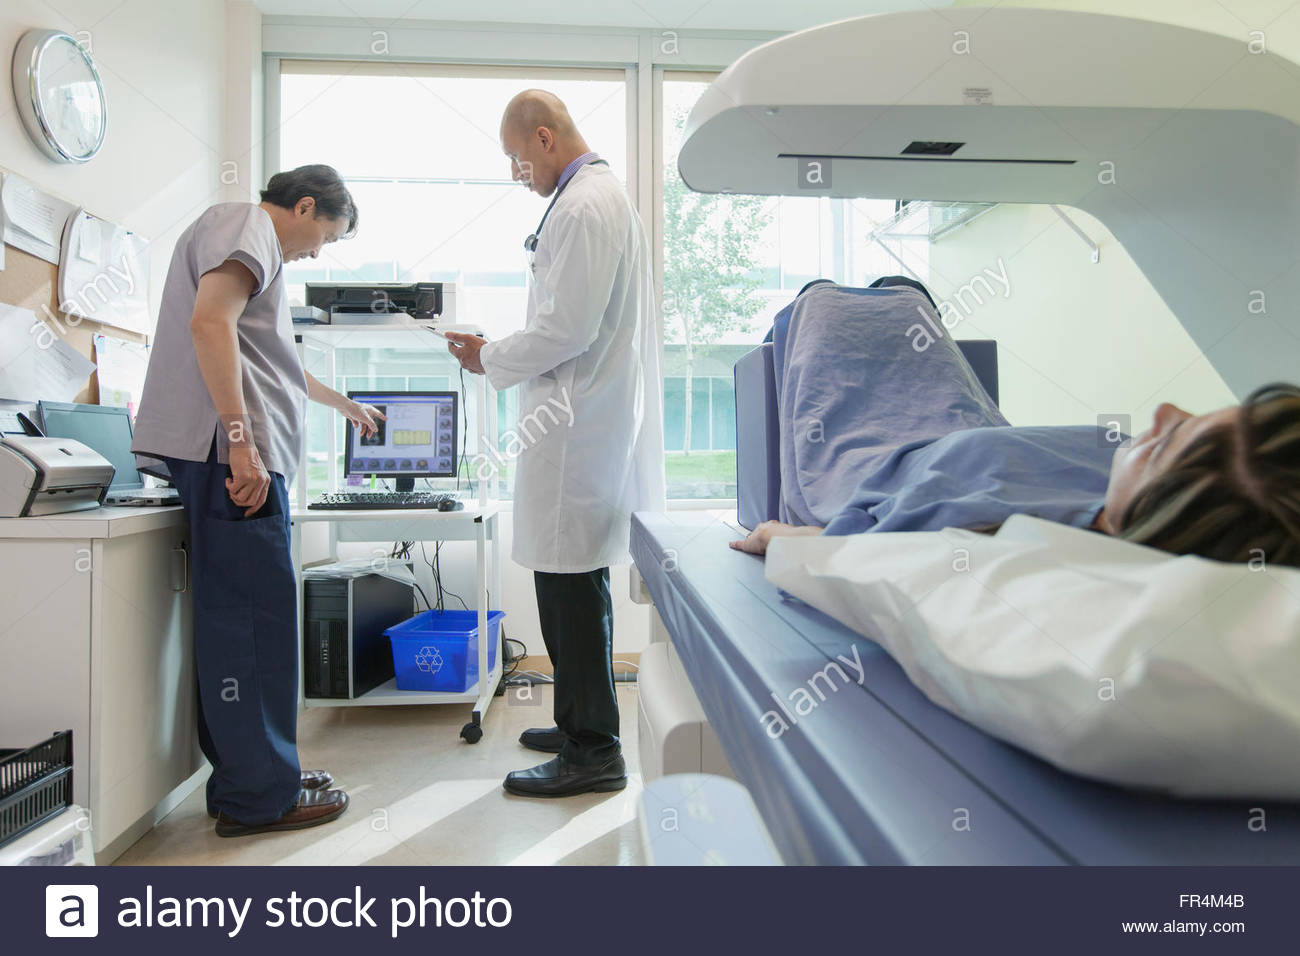 technician and doctor discussing test results Stock Photo